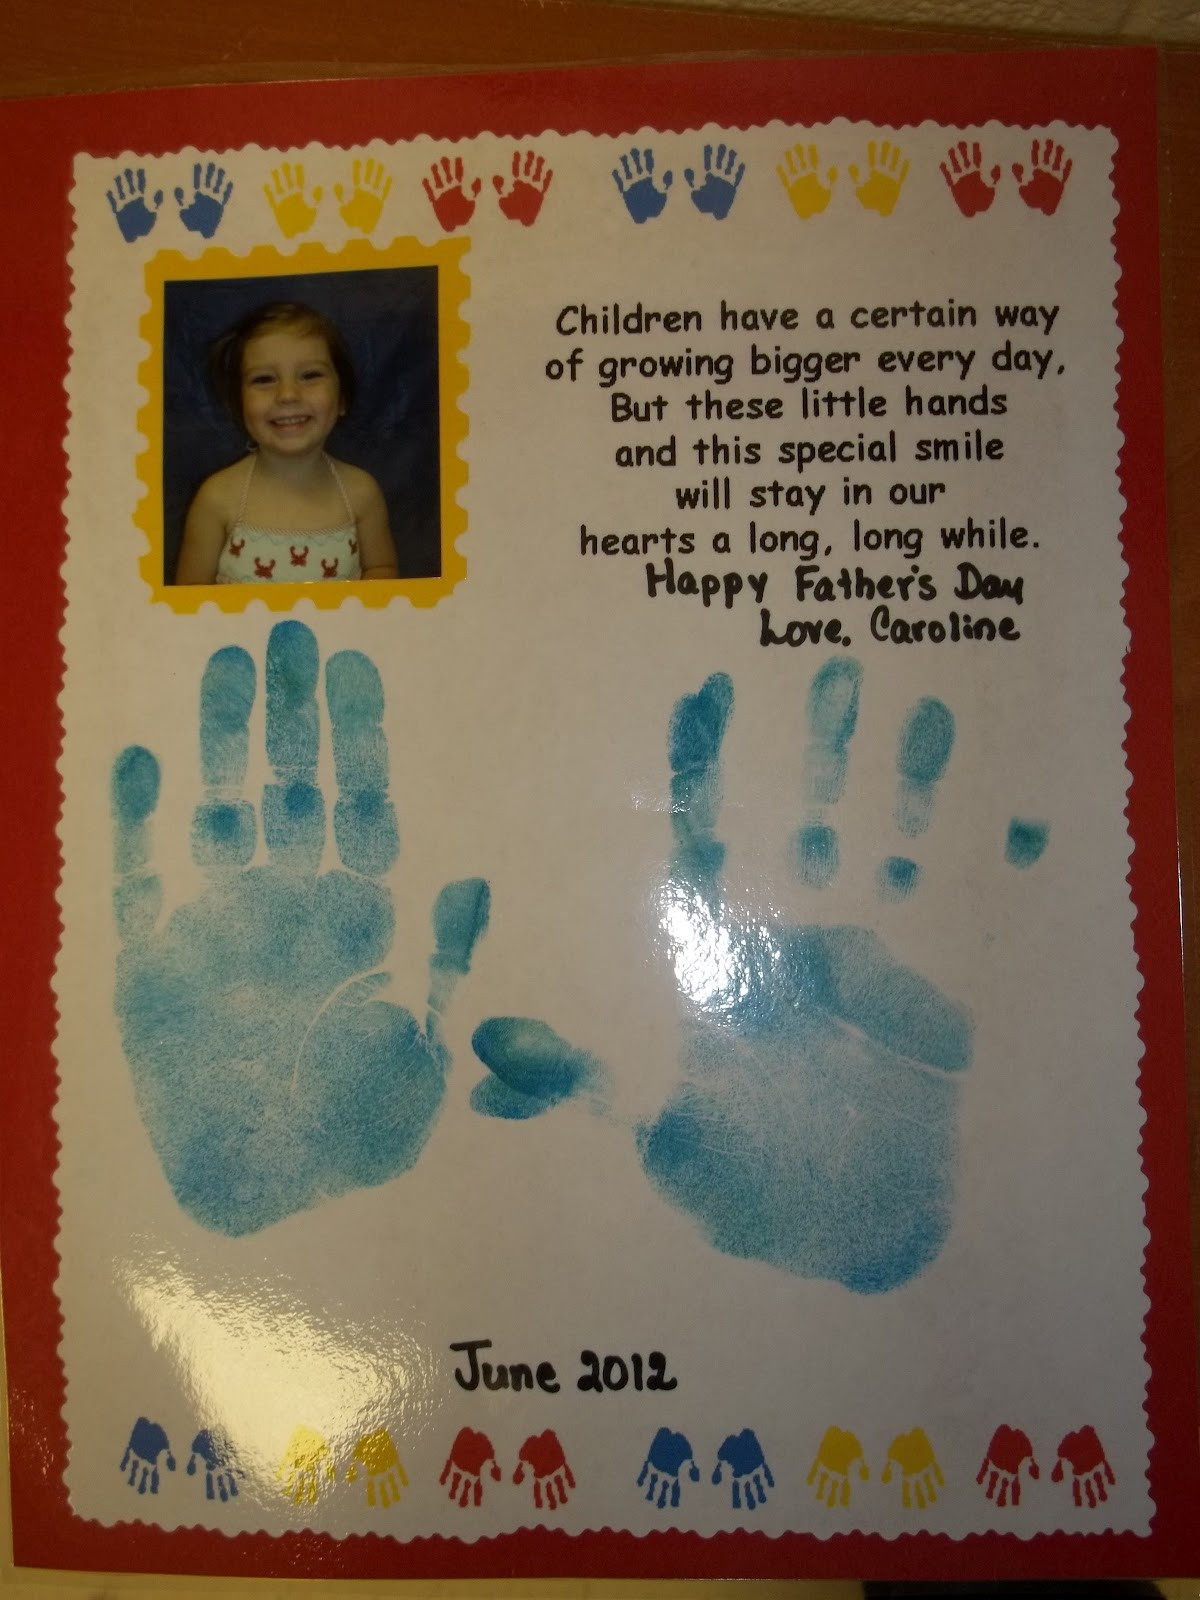 Fathers Day Crafts For Sunday School
 The Stuff We Do Week Before Father s Day Sunday